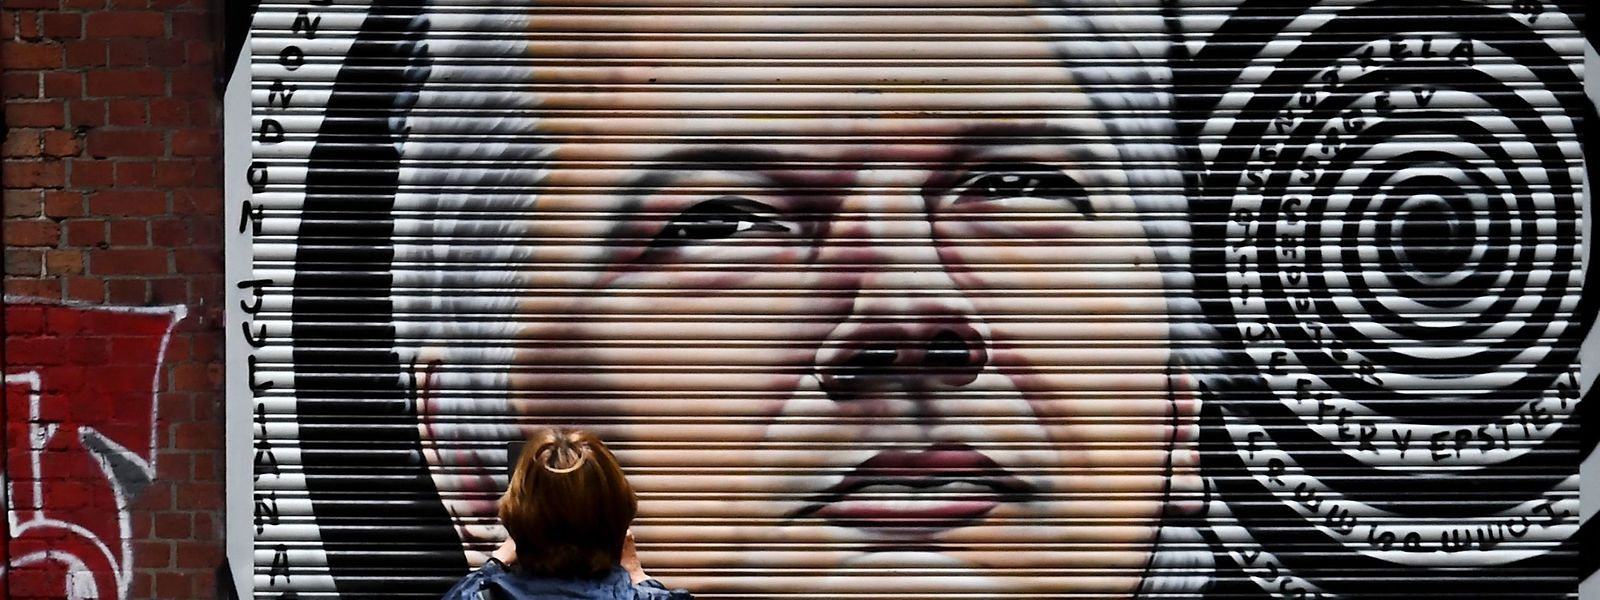 Giant Assange mural in Berlin- Collateral Crucifiction 88677750c87b273c89dbc45179f19399536d4c18